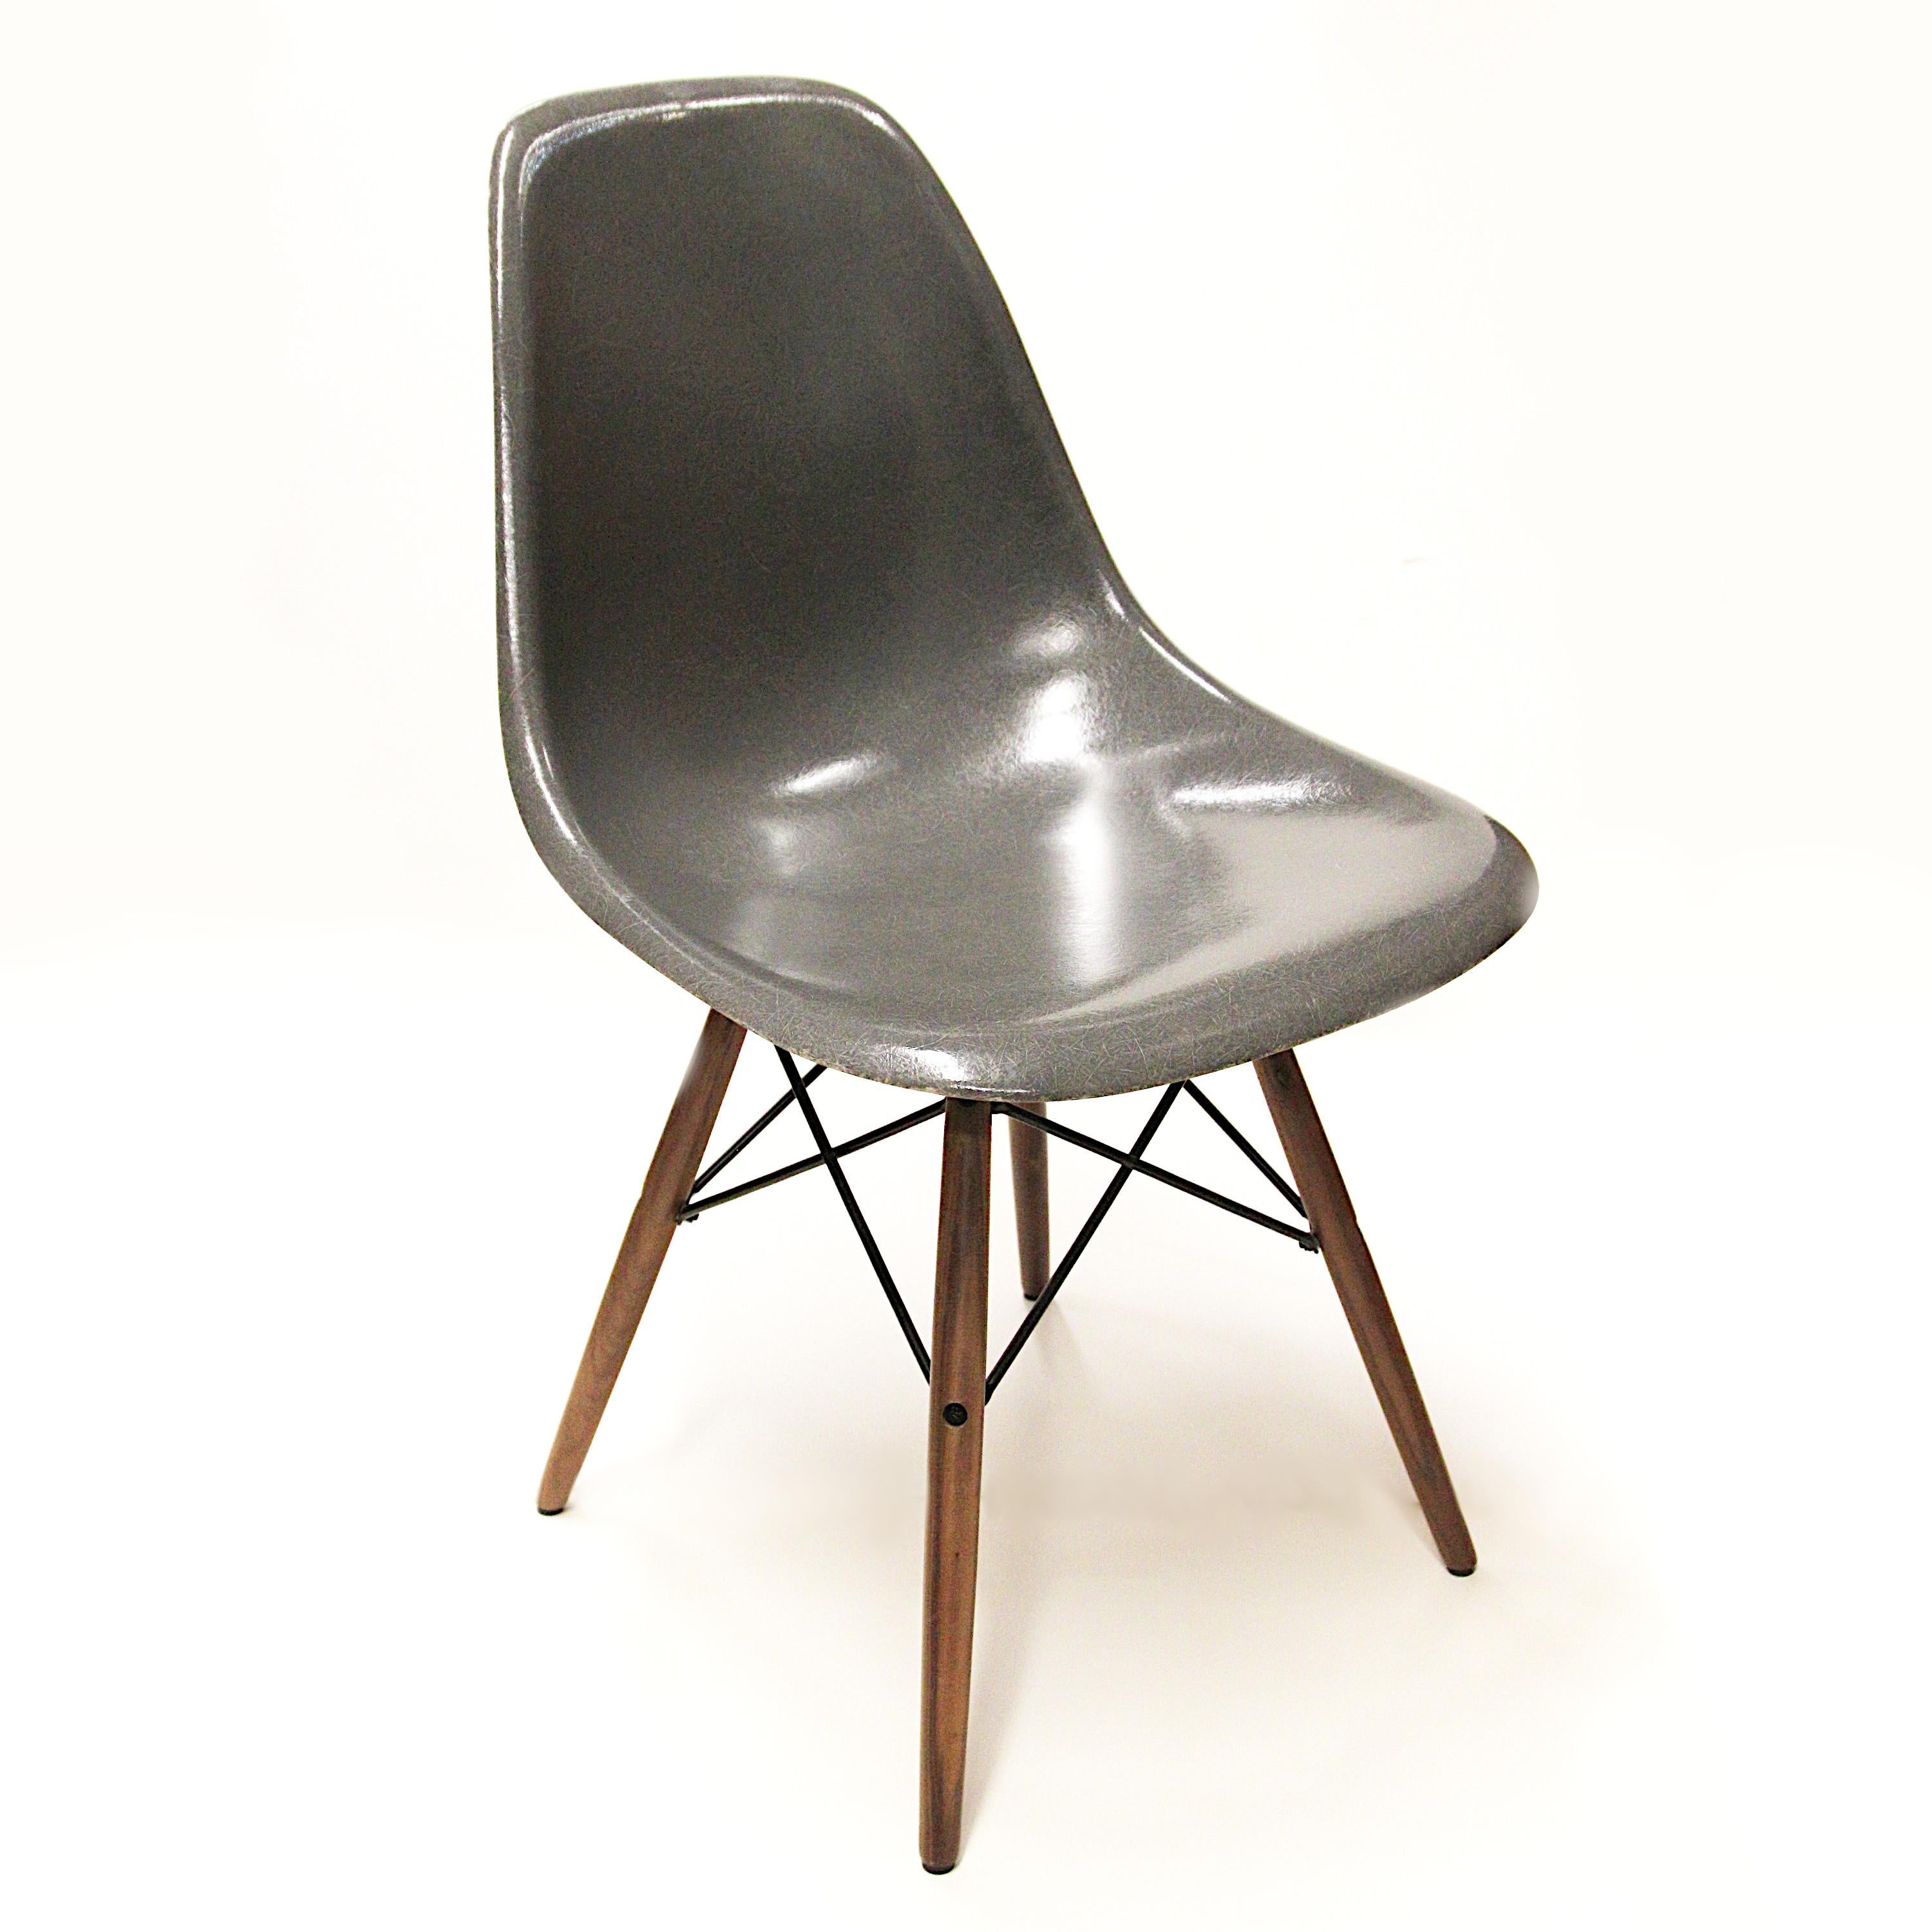 Fantastic set of original vintage fiberglass shell chairs by Charles & Ray Eames for Herman Miller. Chairs feature a rare 